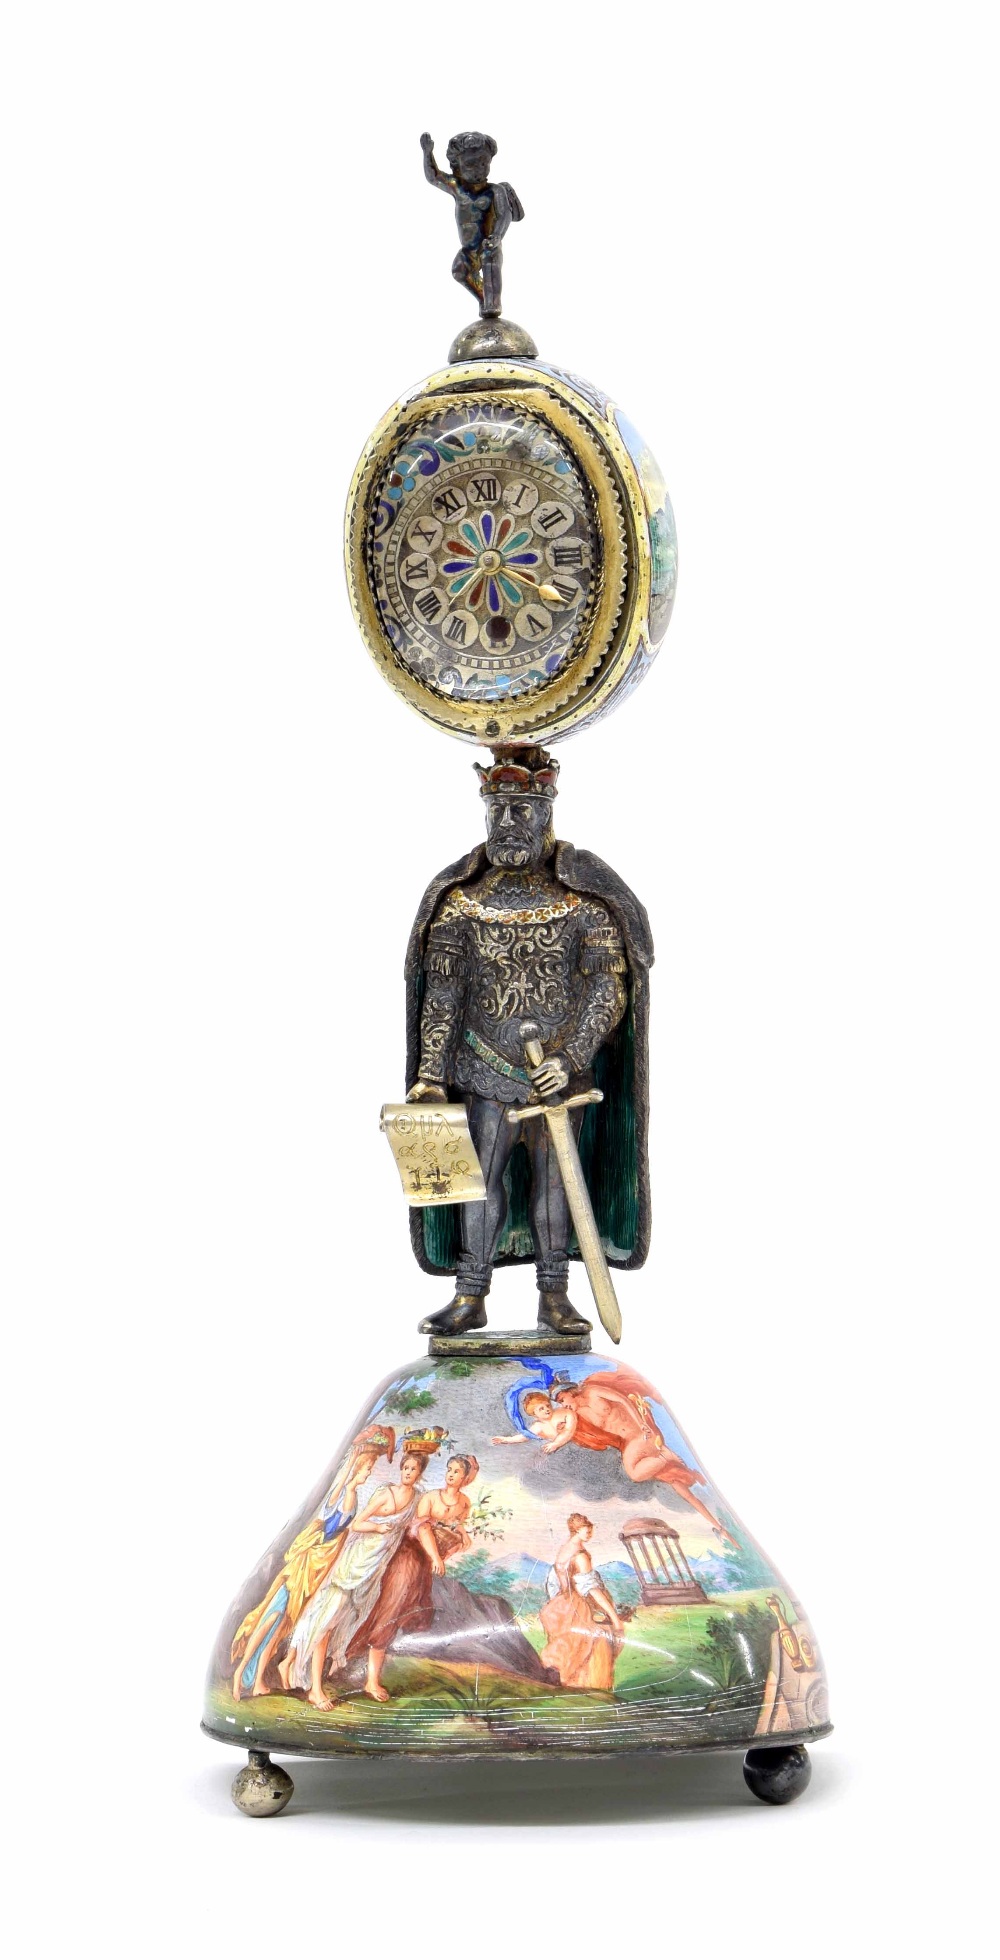 Viennese silver-gilt and enamel monstrance clock, base of bell form on silvered paw feet and